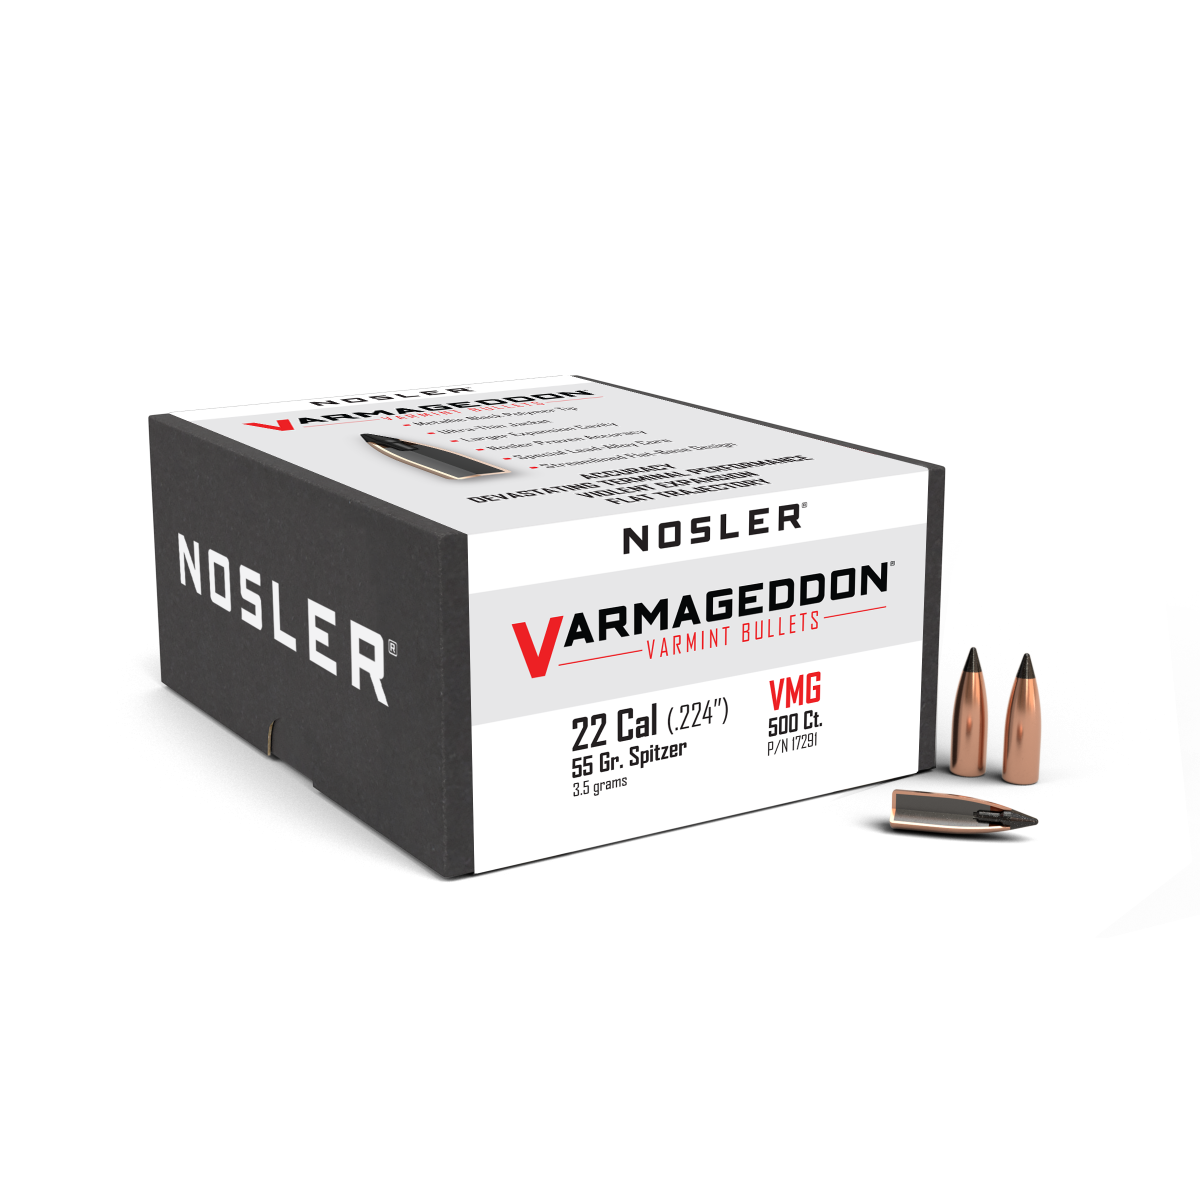 Nosler Varmageddon 22 cal 55gr Tip Projectiles - 500pk -  - Mansfield Hunting & Fishing - Products to prepare for Corona Virus